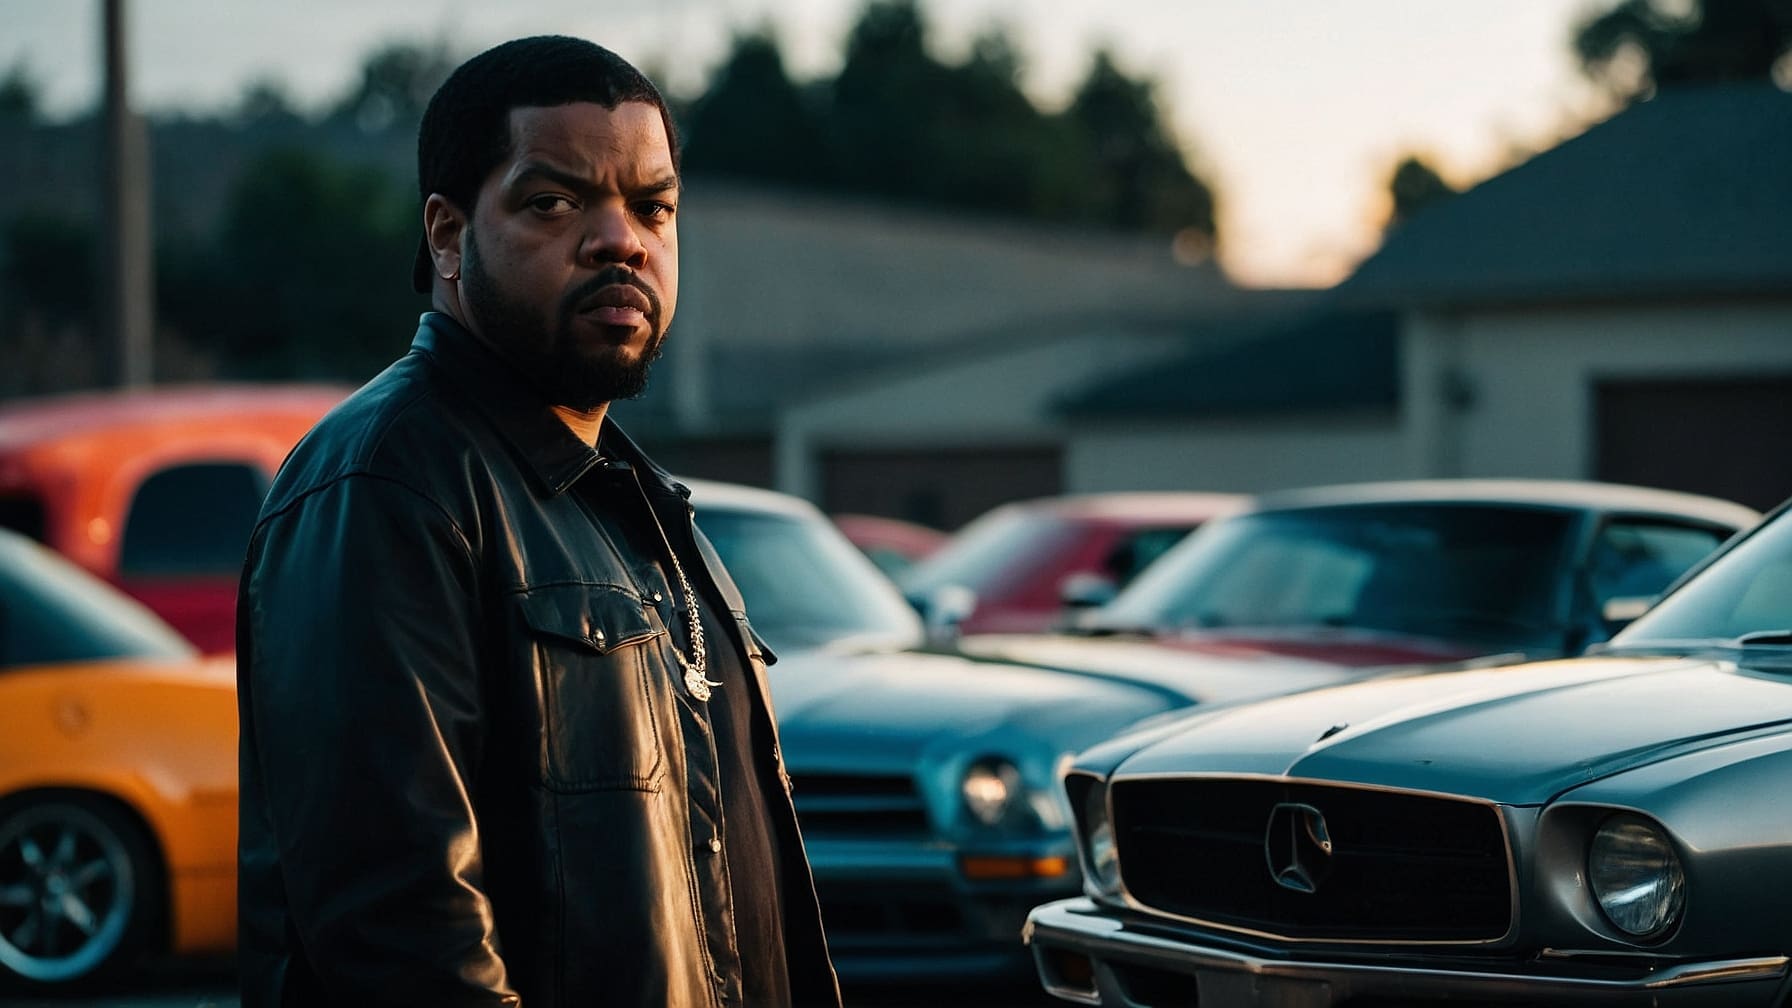 Ice_Cube_standing_and_alot_of_luxury_cars_in_behind_hi